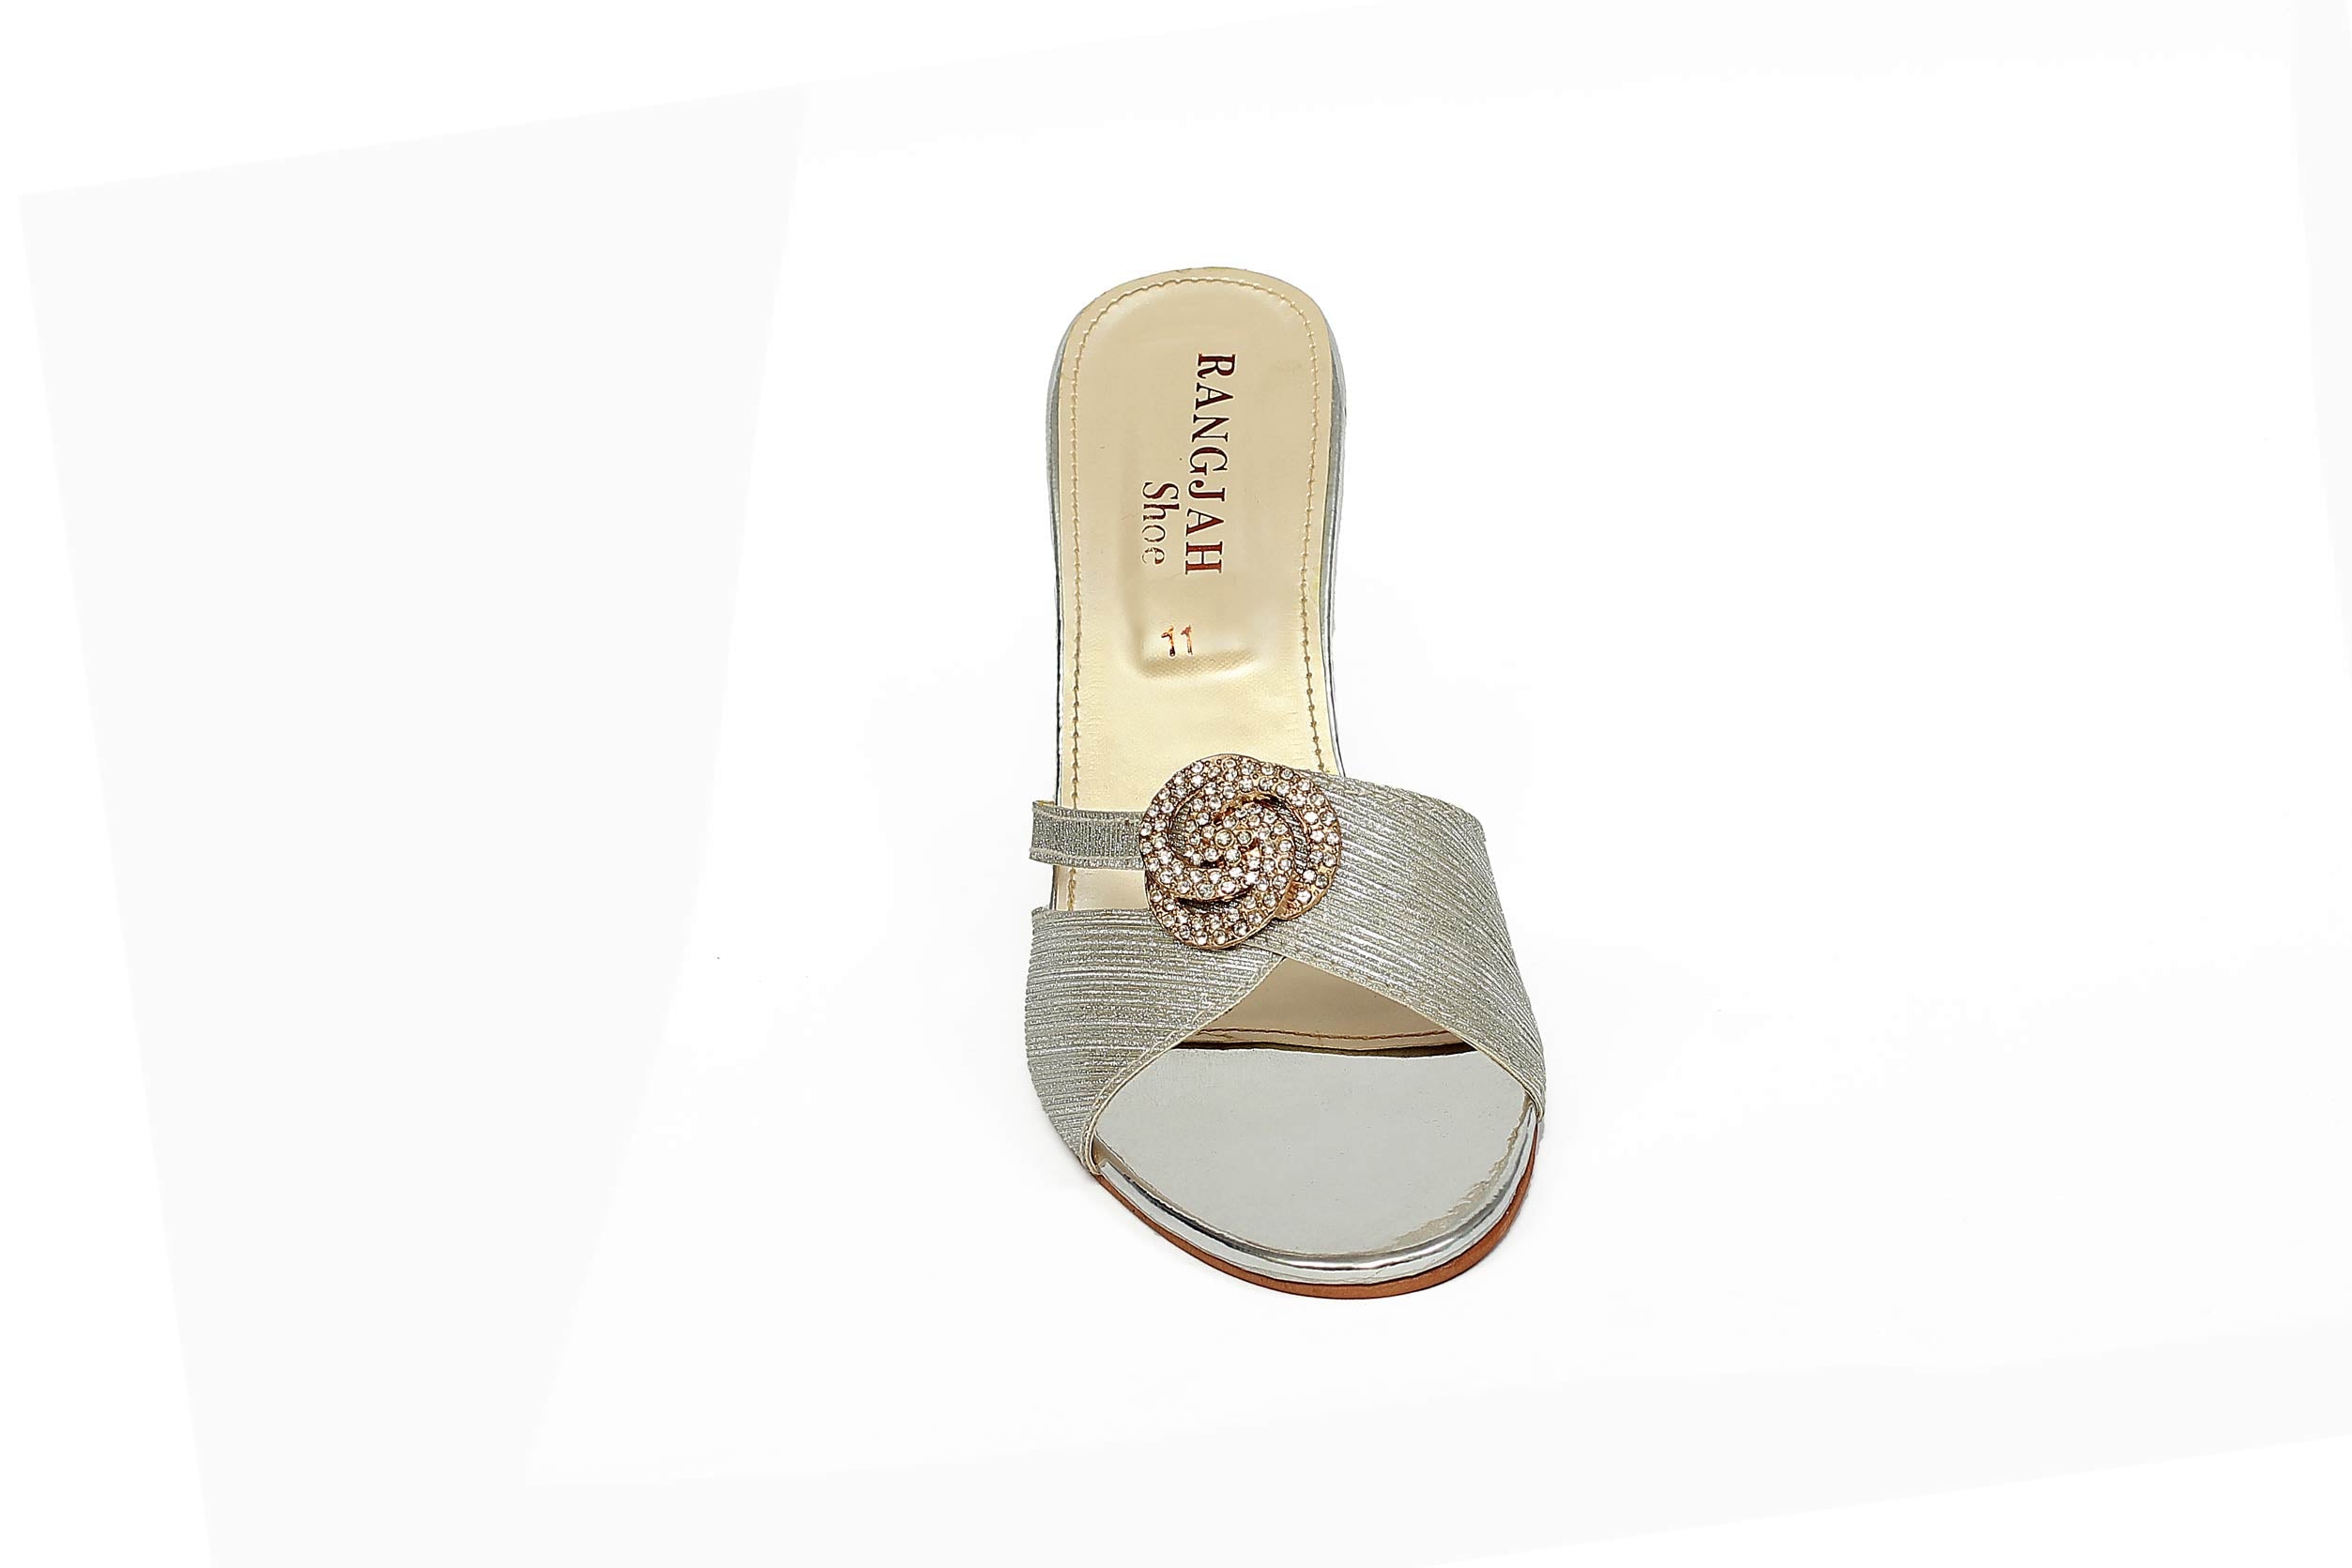 Silver Color Fancy Slippers-RS12 - Rang Jah